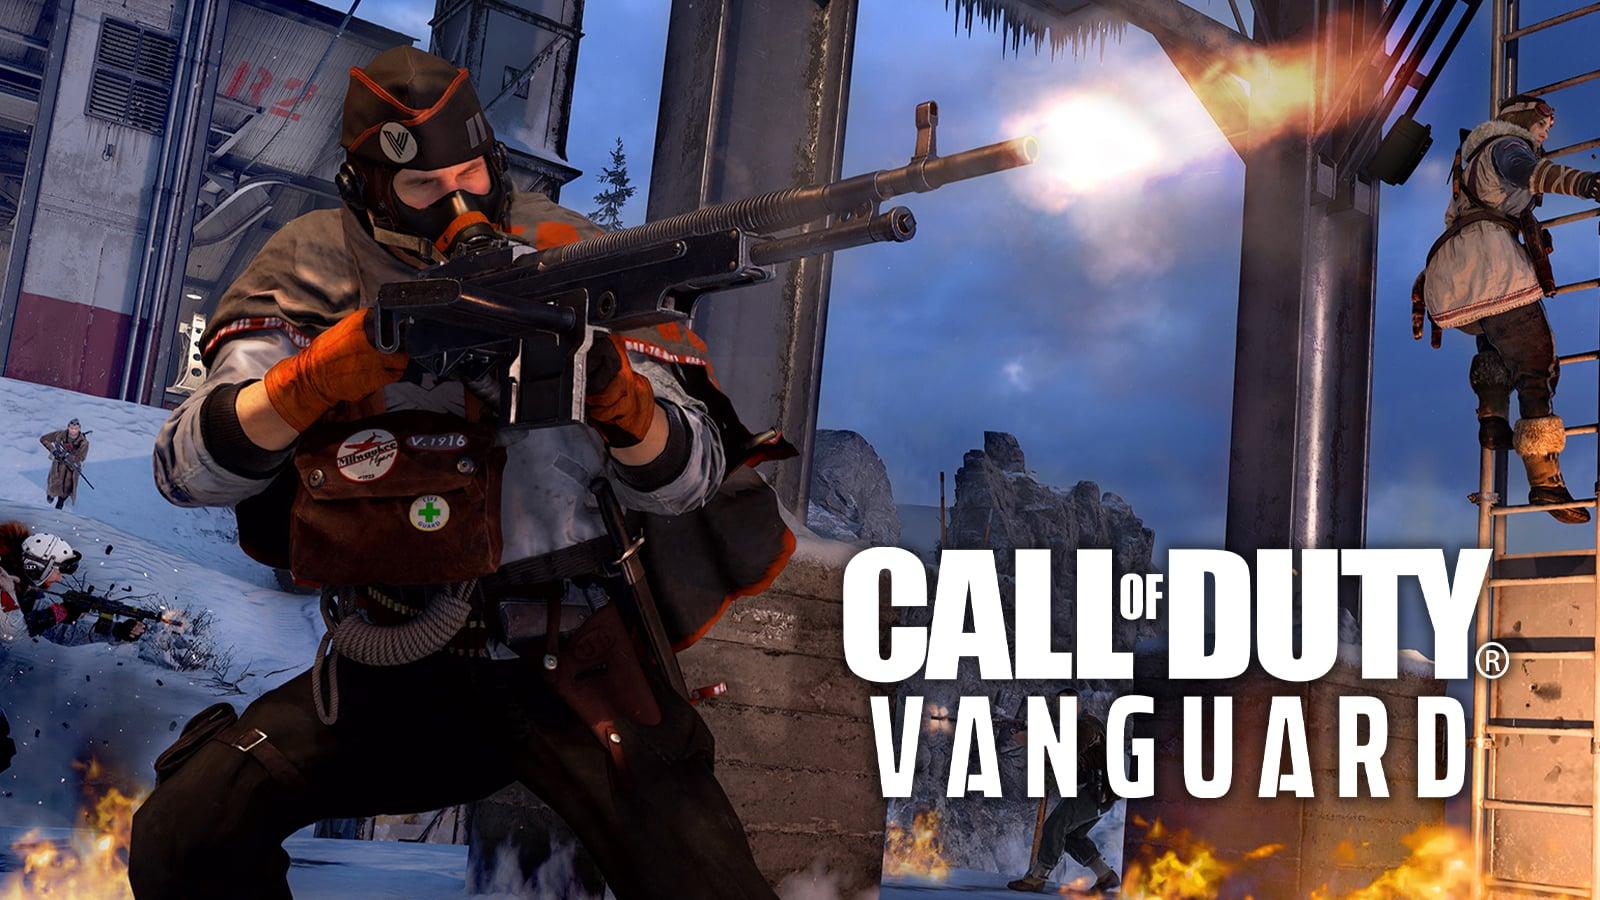 COD Vanguard February 10 Update Out Now on All Platforms for Season 2